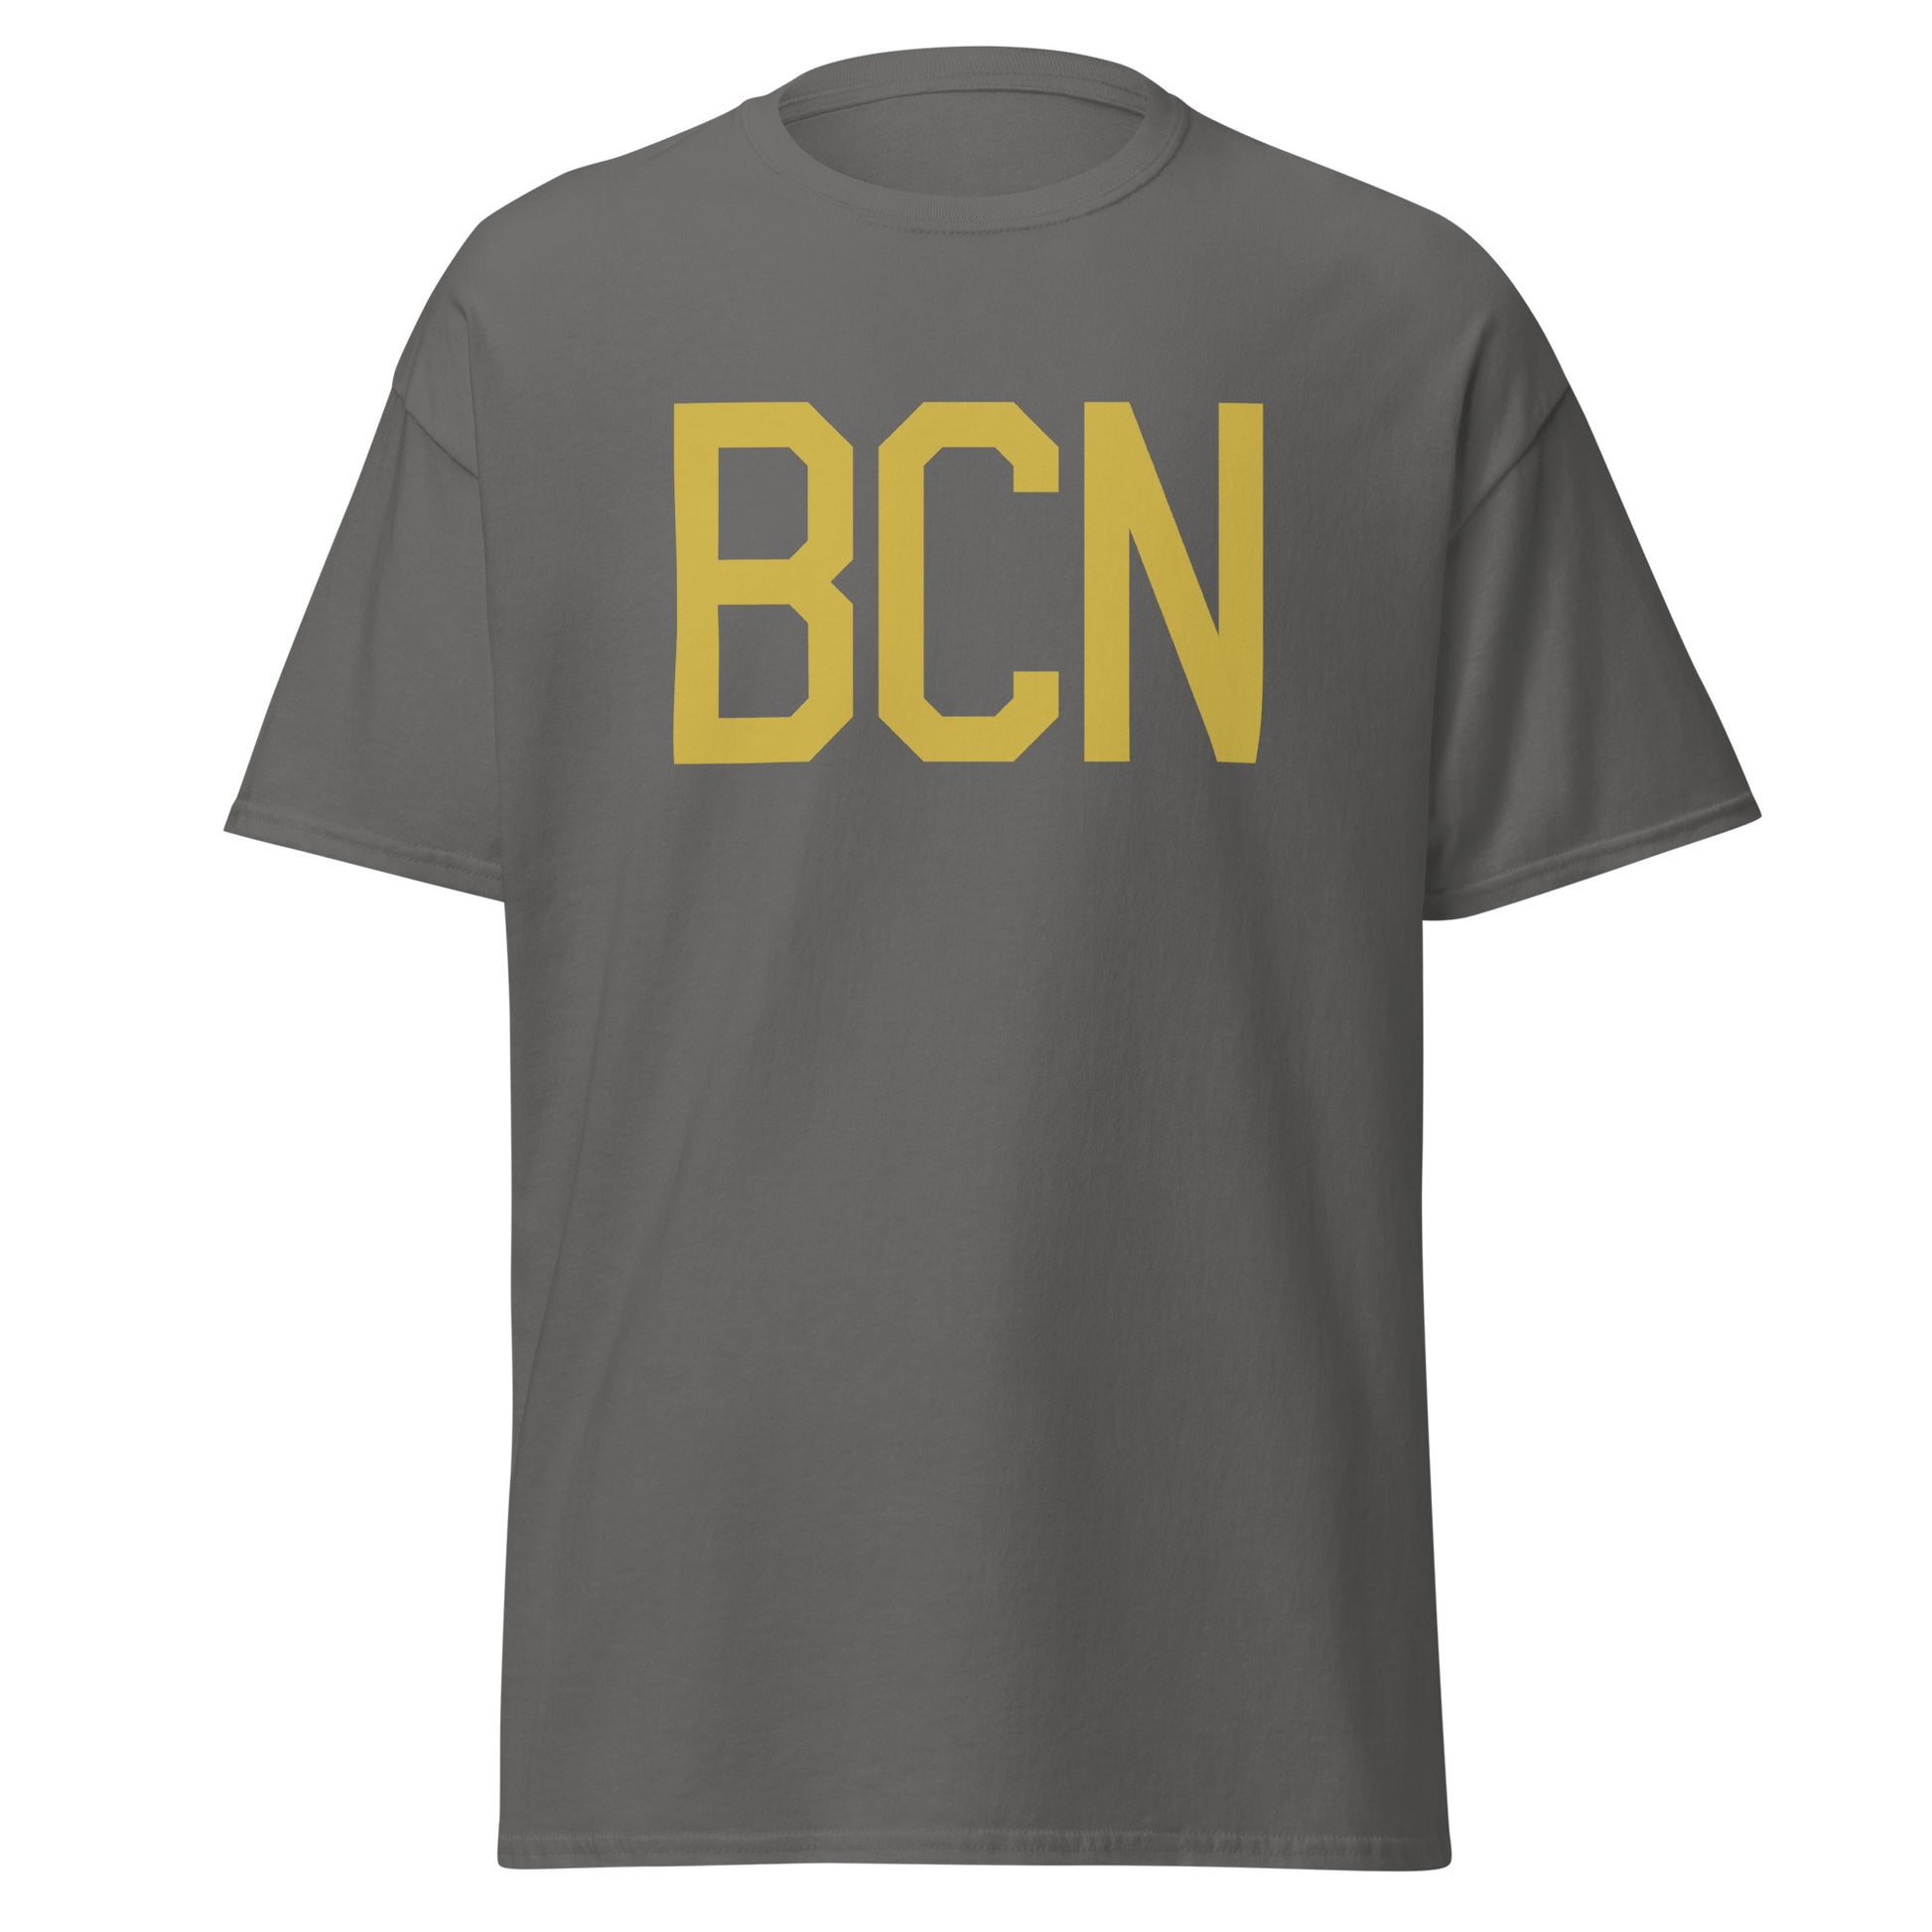 Aviation Enthusiast Men's Tee - Old Gold Graphic • BCN Barcelona • YHM Designs - Image 05